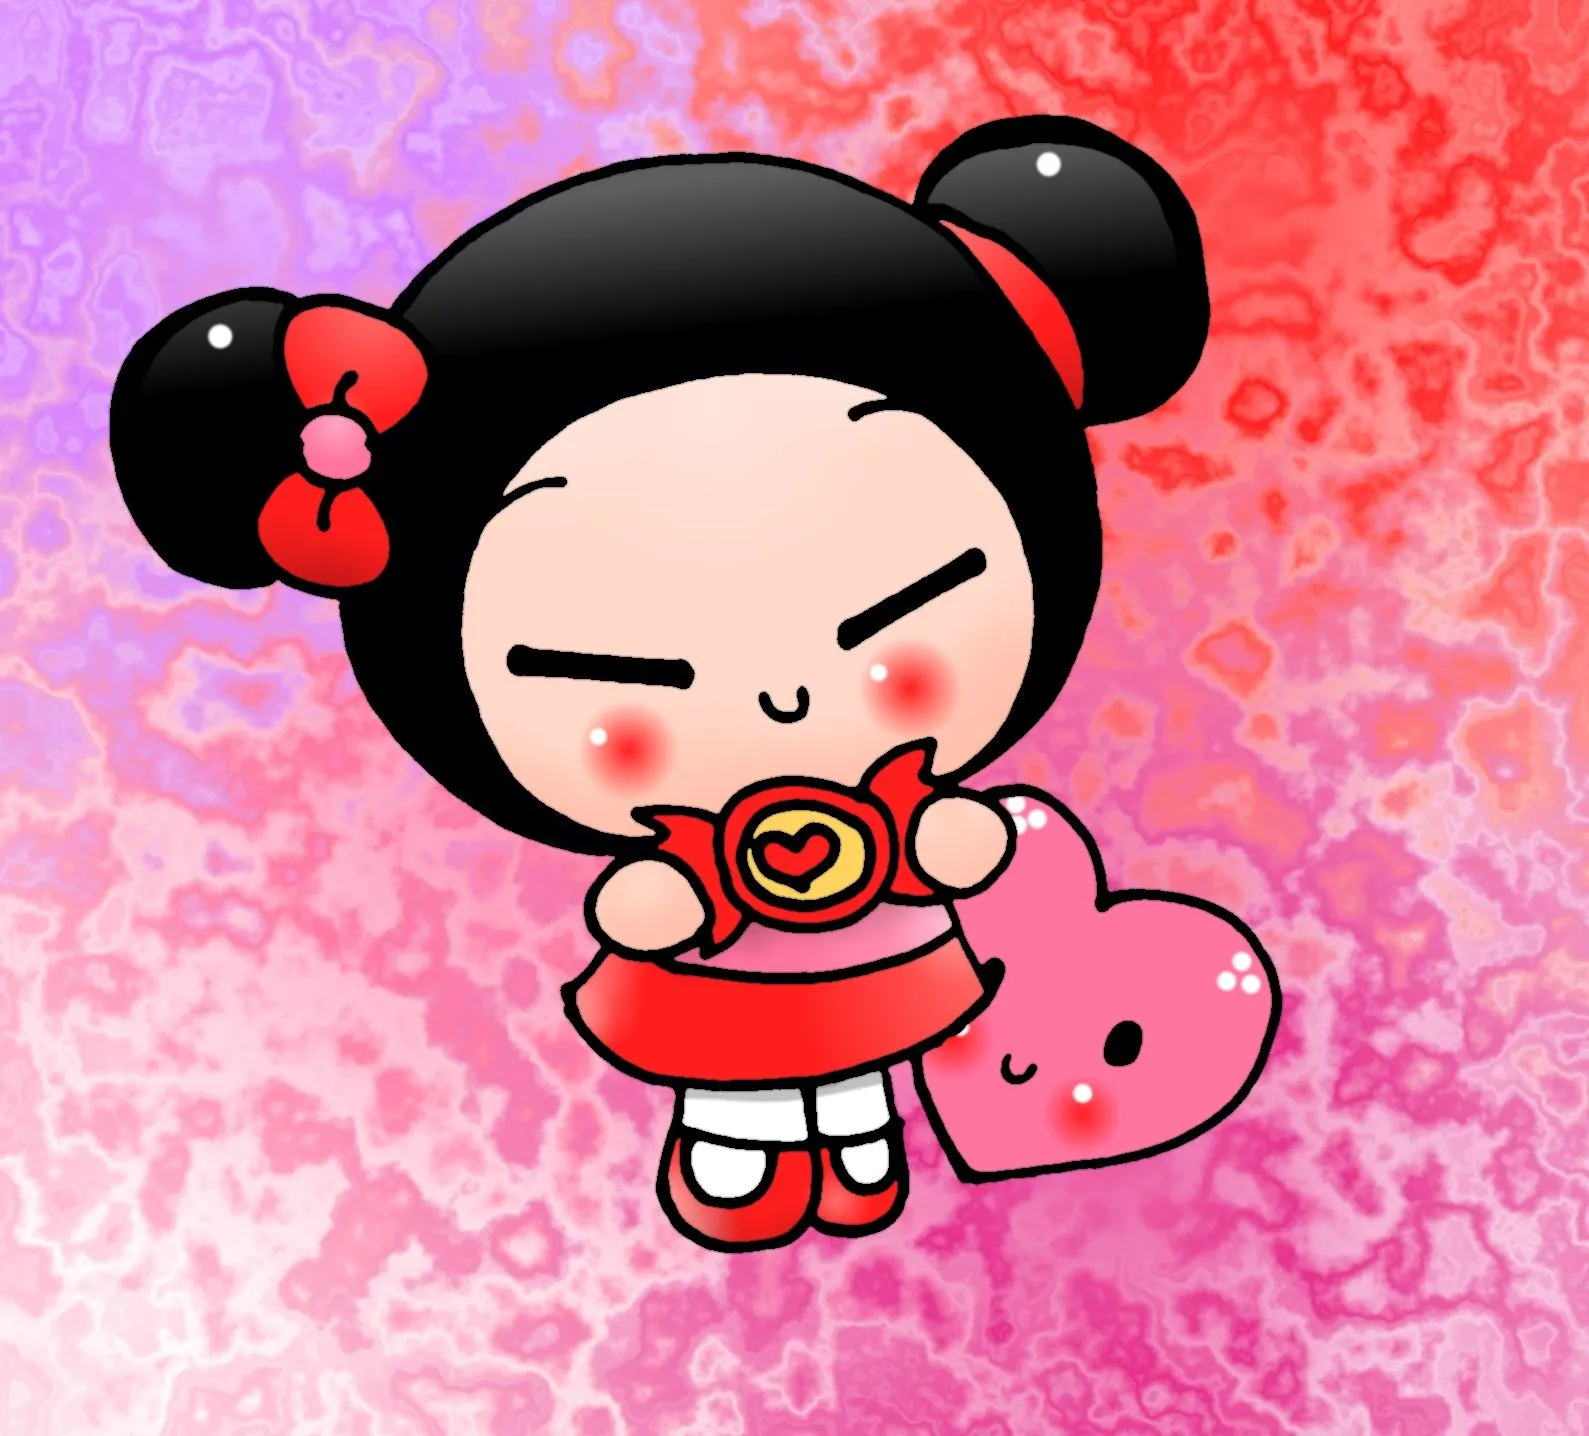 Pucca__D_by_FlopyLopez.jpg